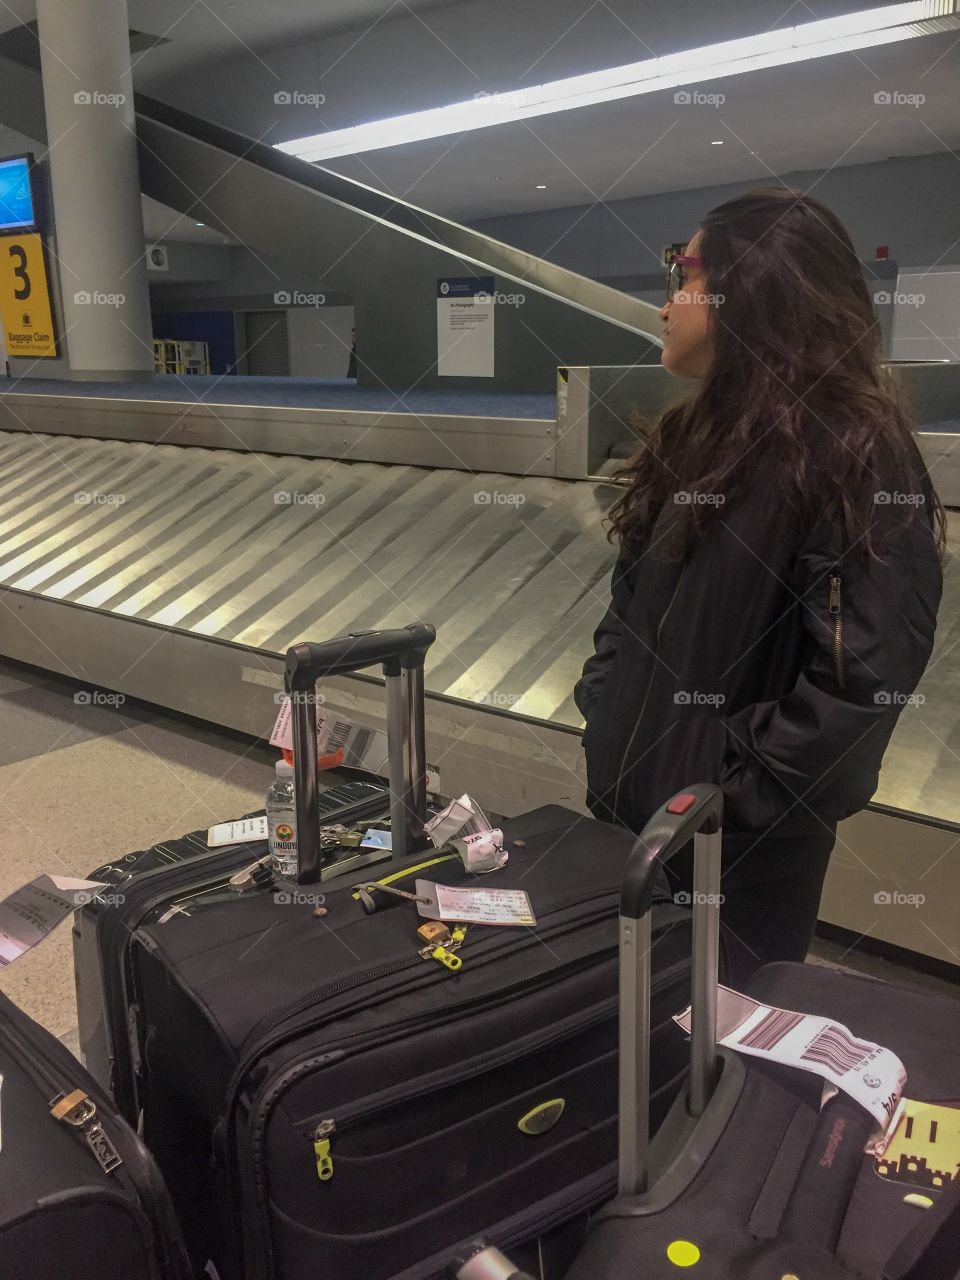 A girl waiting for a bag in the baggage claim